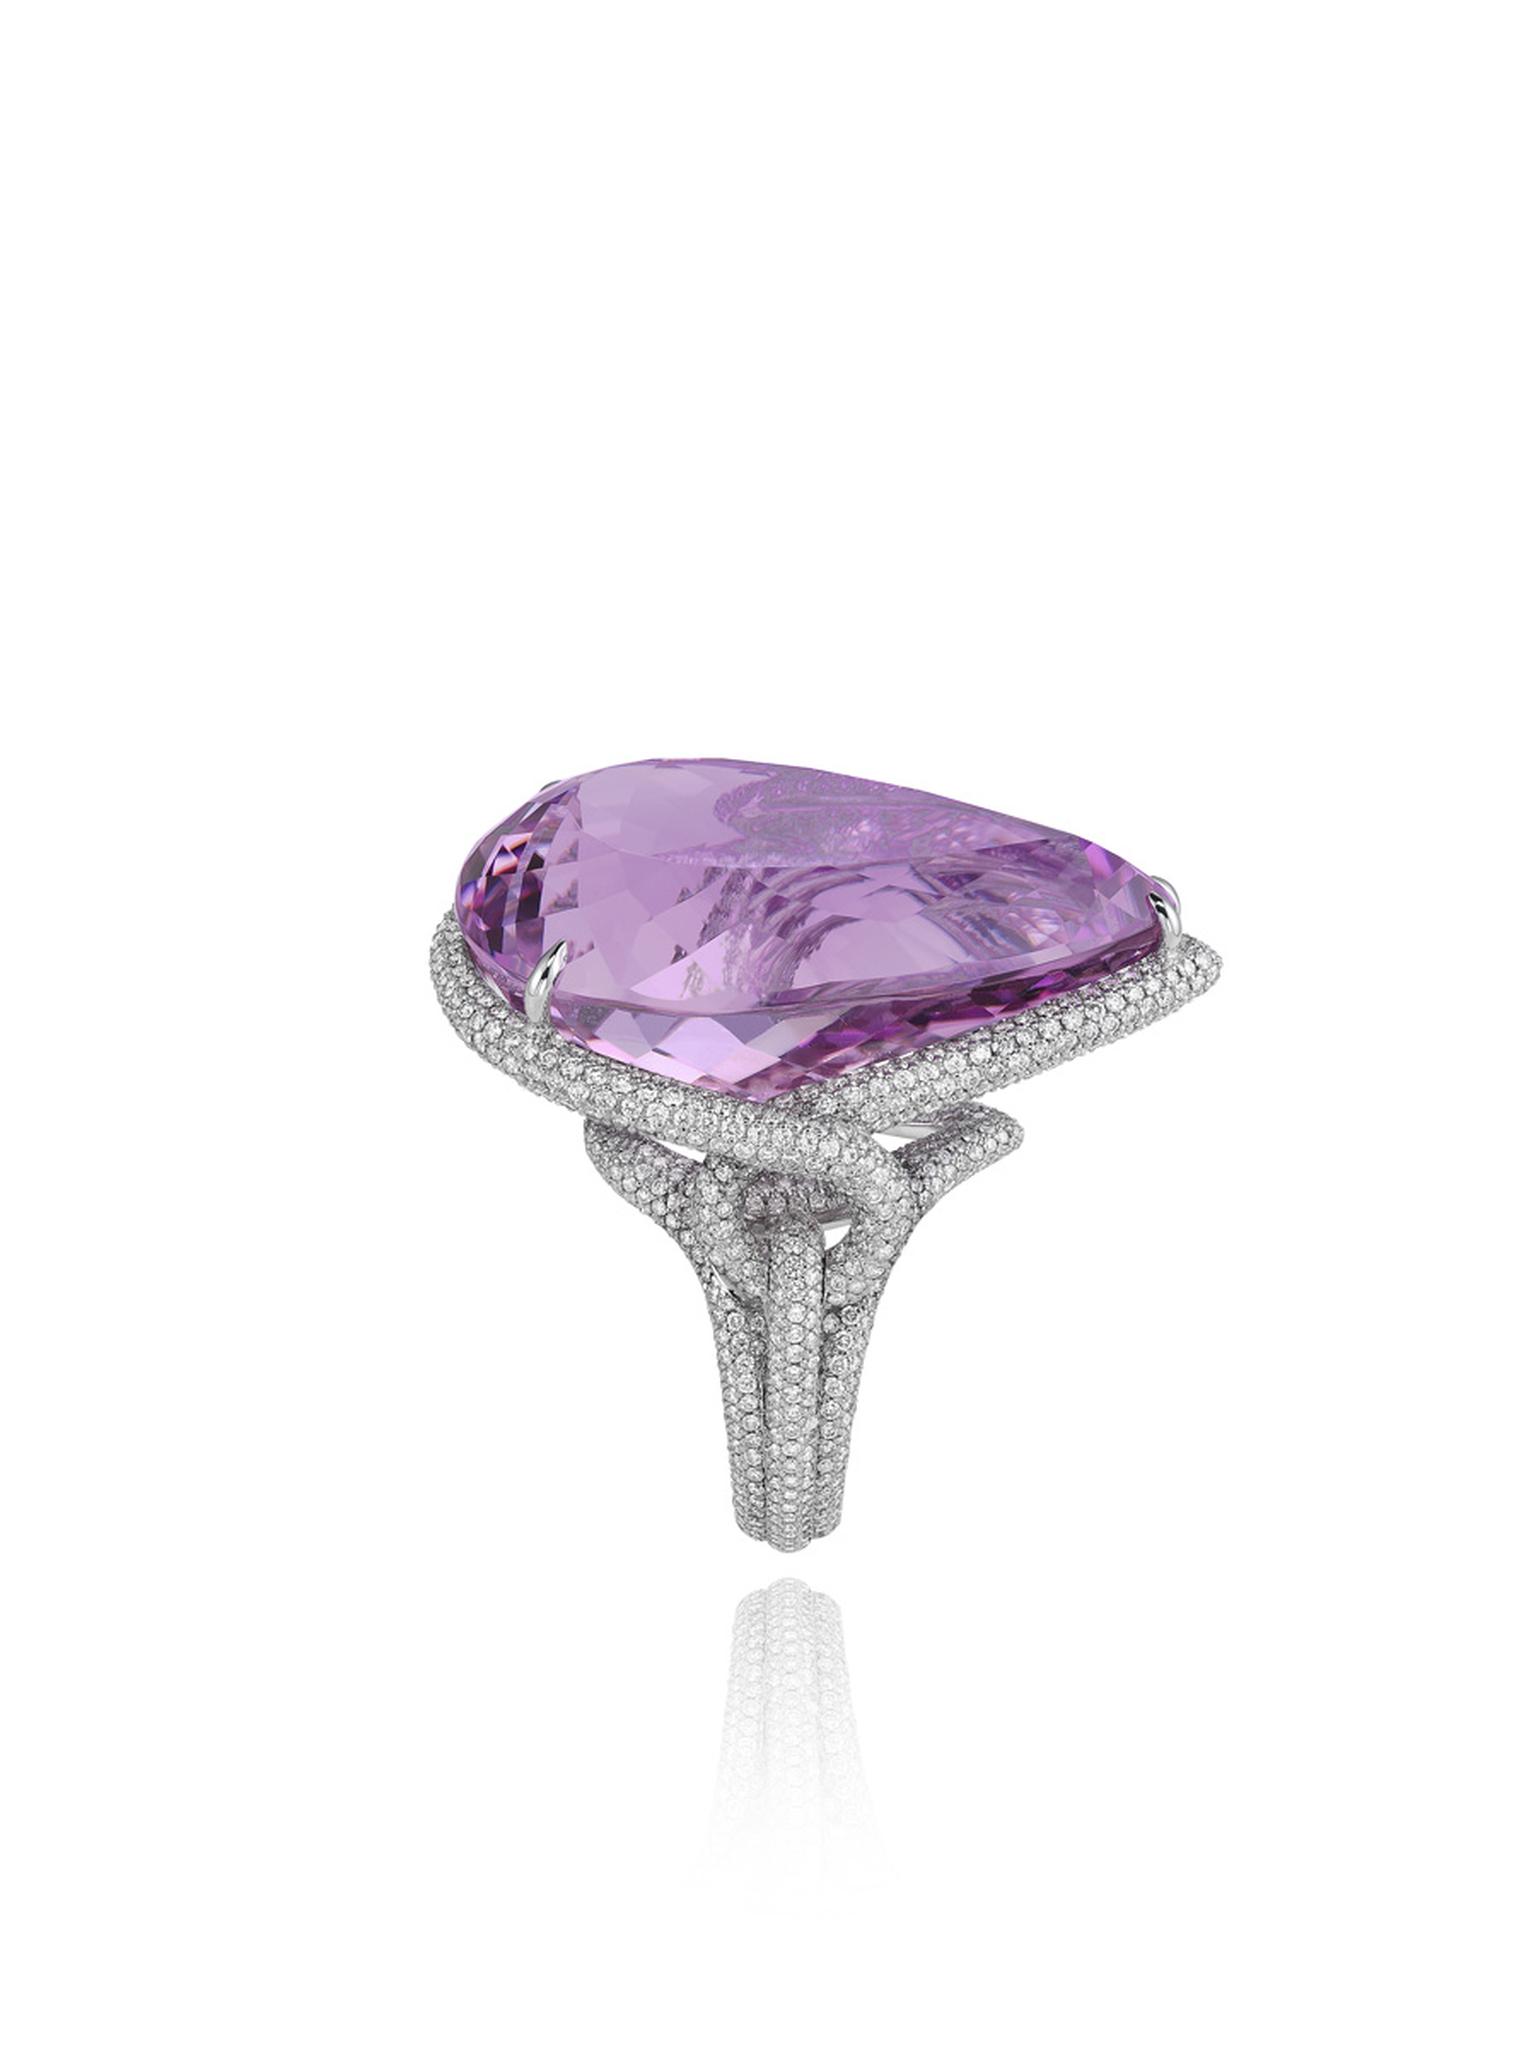 manual-Kunzite-Ring--from-the-Red-Carpet-Collection-2013.jpg